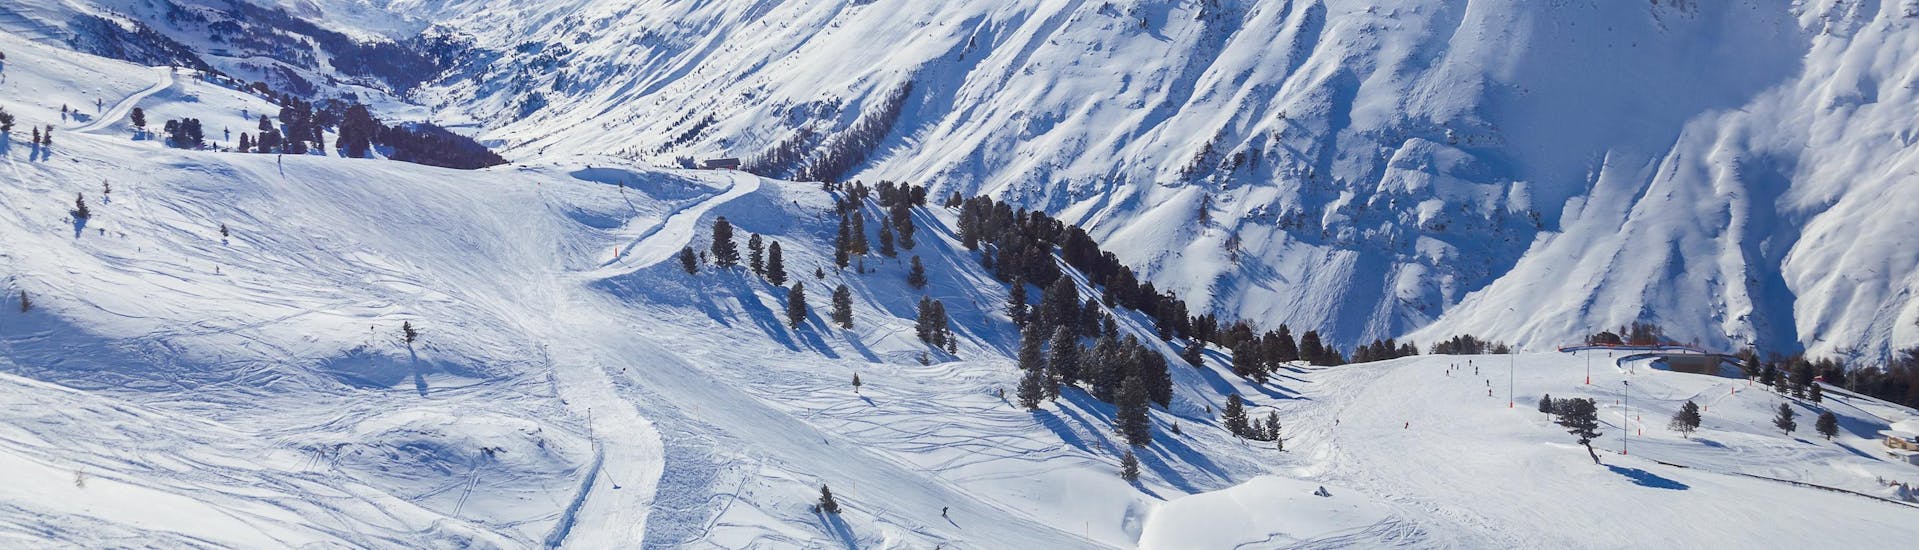 View of the alpine landscape of the ski resort of Obergurgl where local ski schools offer their ski lessons.